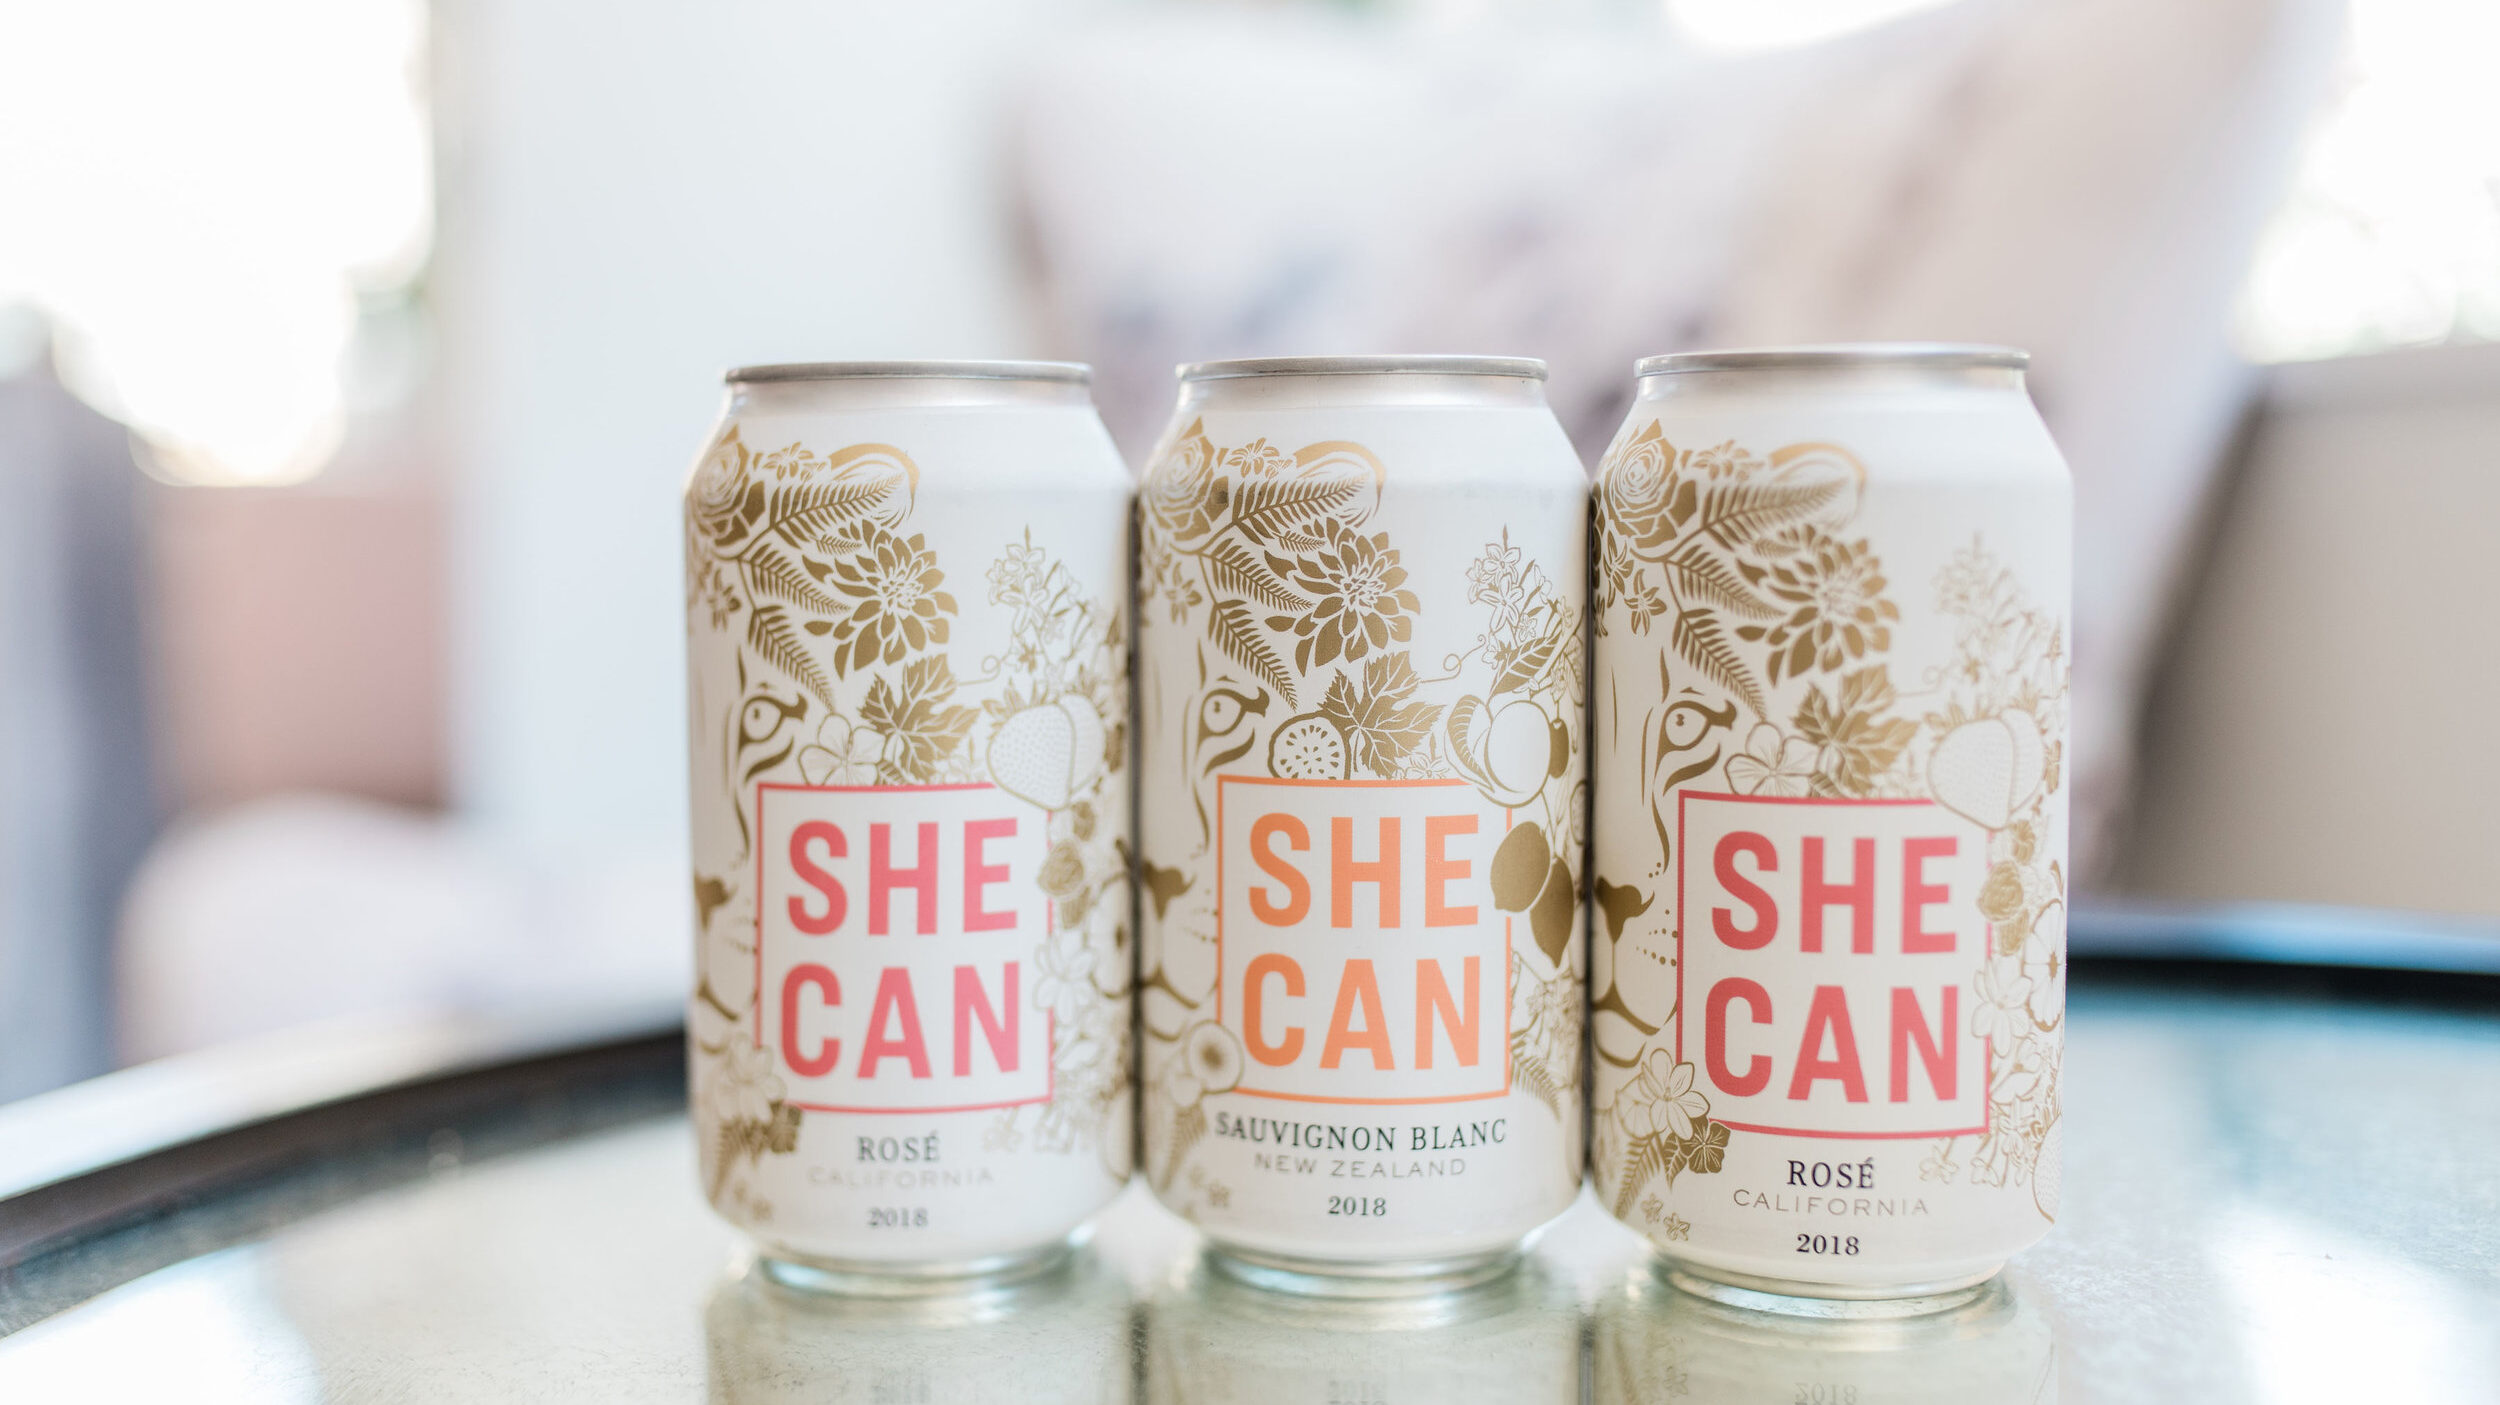 SHE CAN - canned wine by the McBride sisters